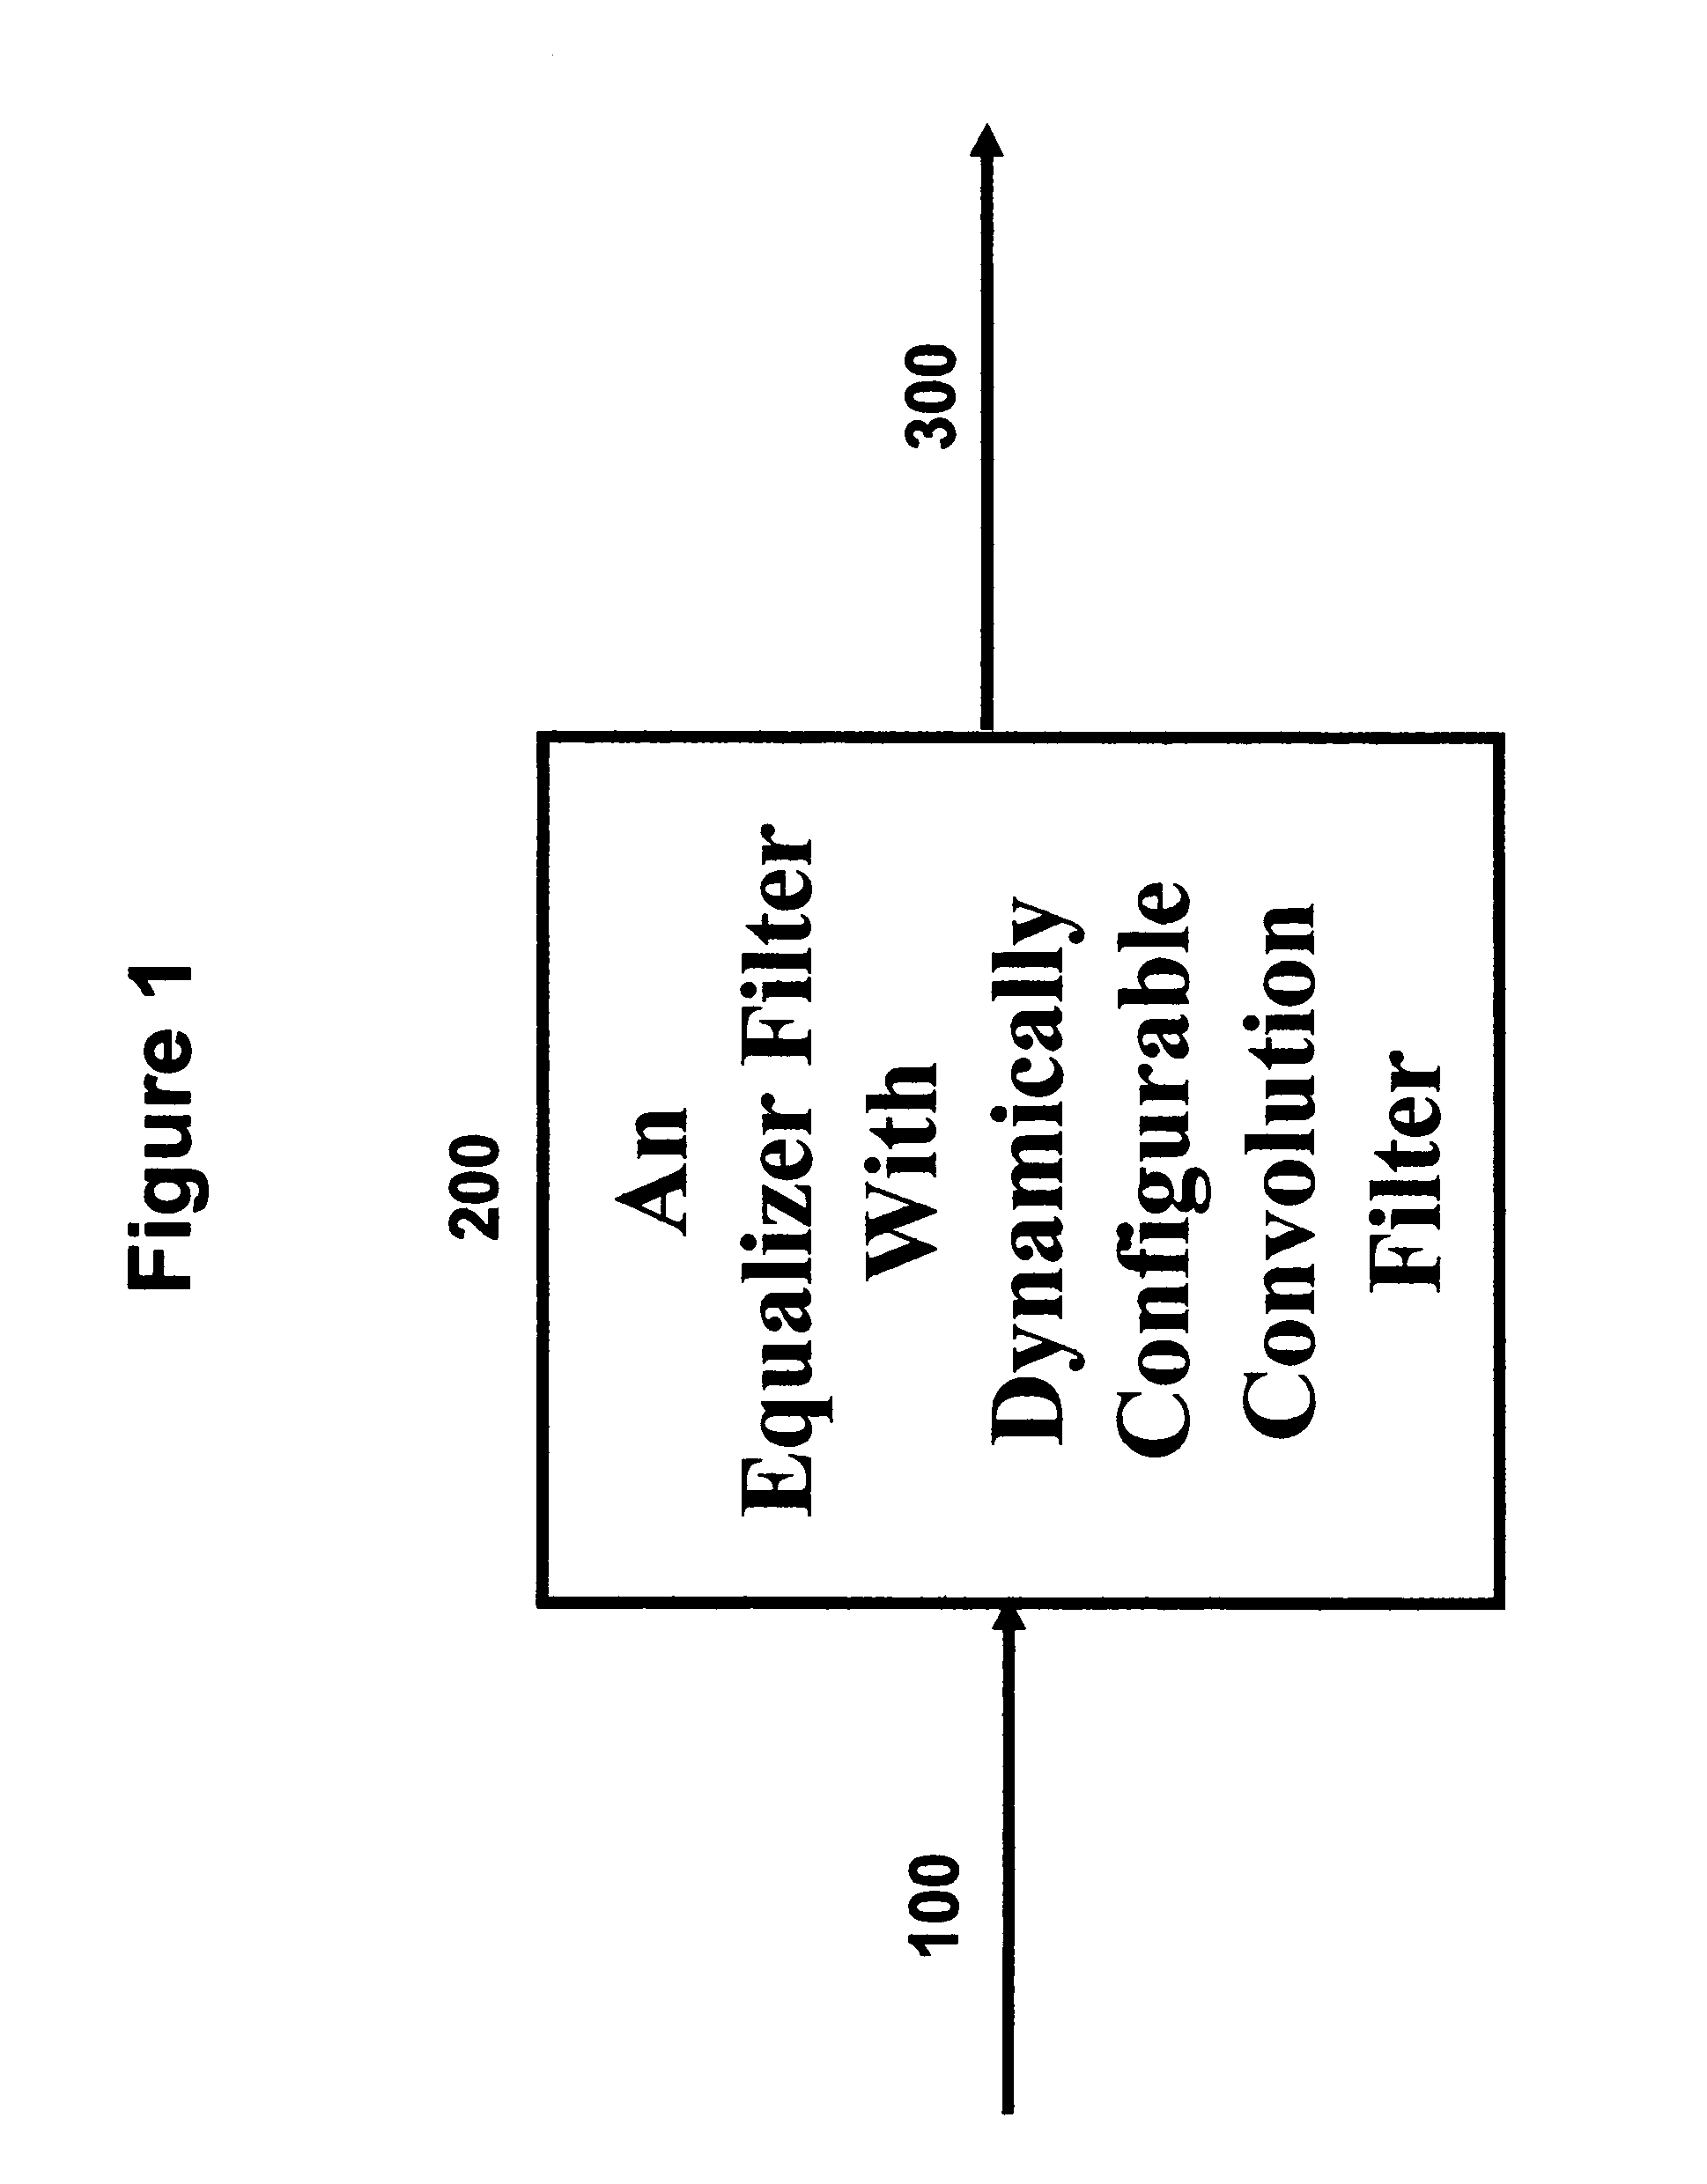 Equalizer filter with dynamically configurable convolution filter